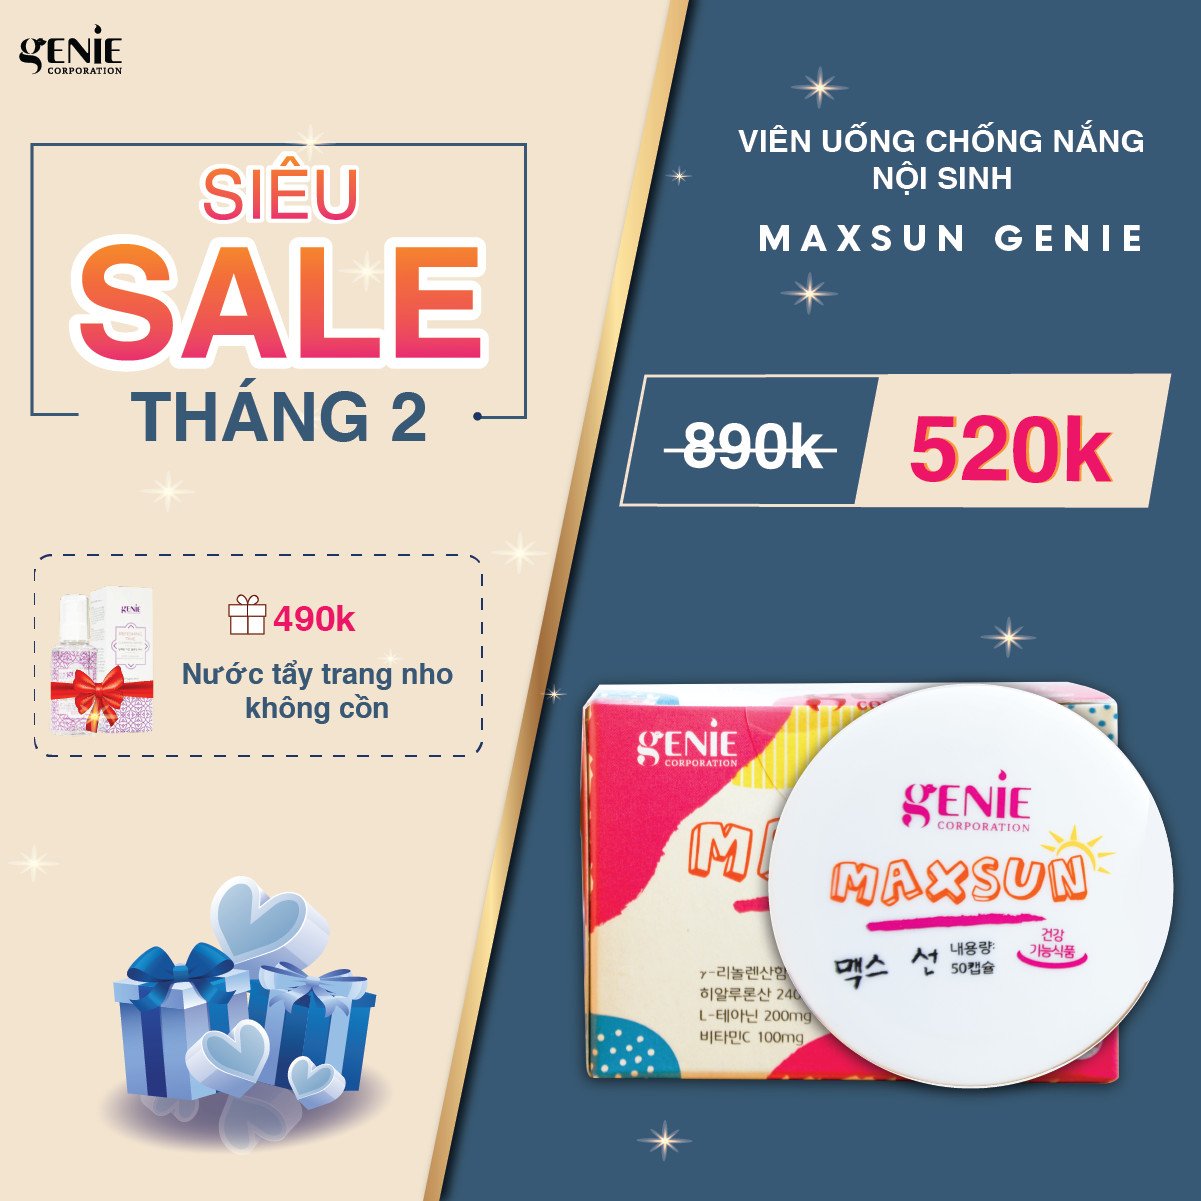 sale thang 2 13 geniecorp.vn